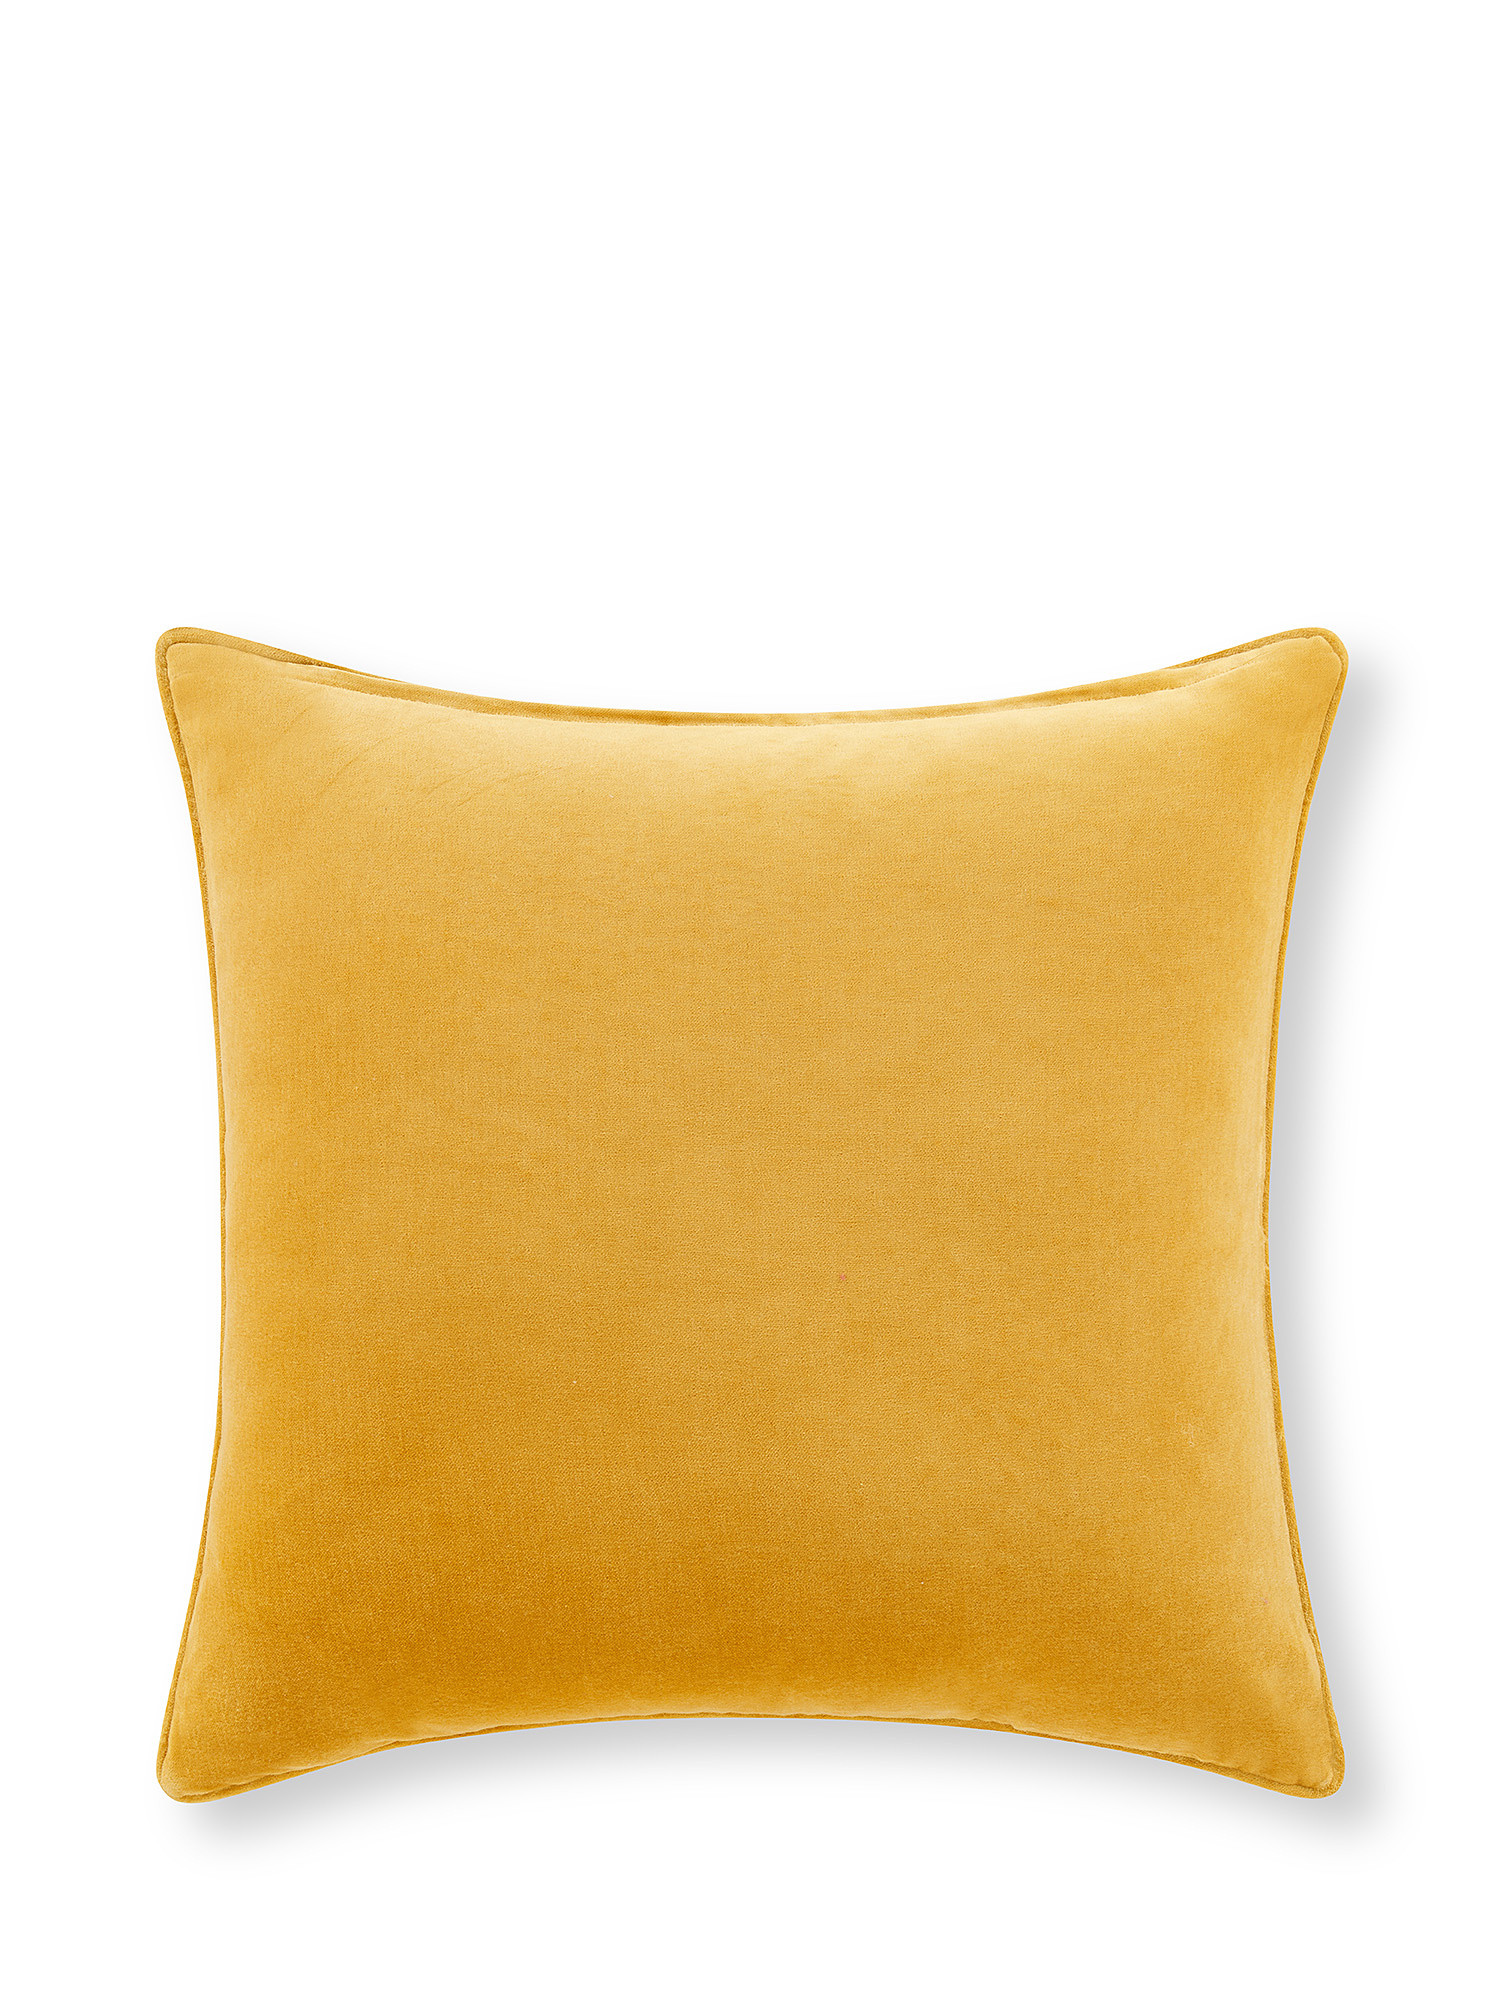 Velvet cushion with flower embroidery 45x45cm, Yellow, large image number 1